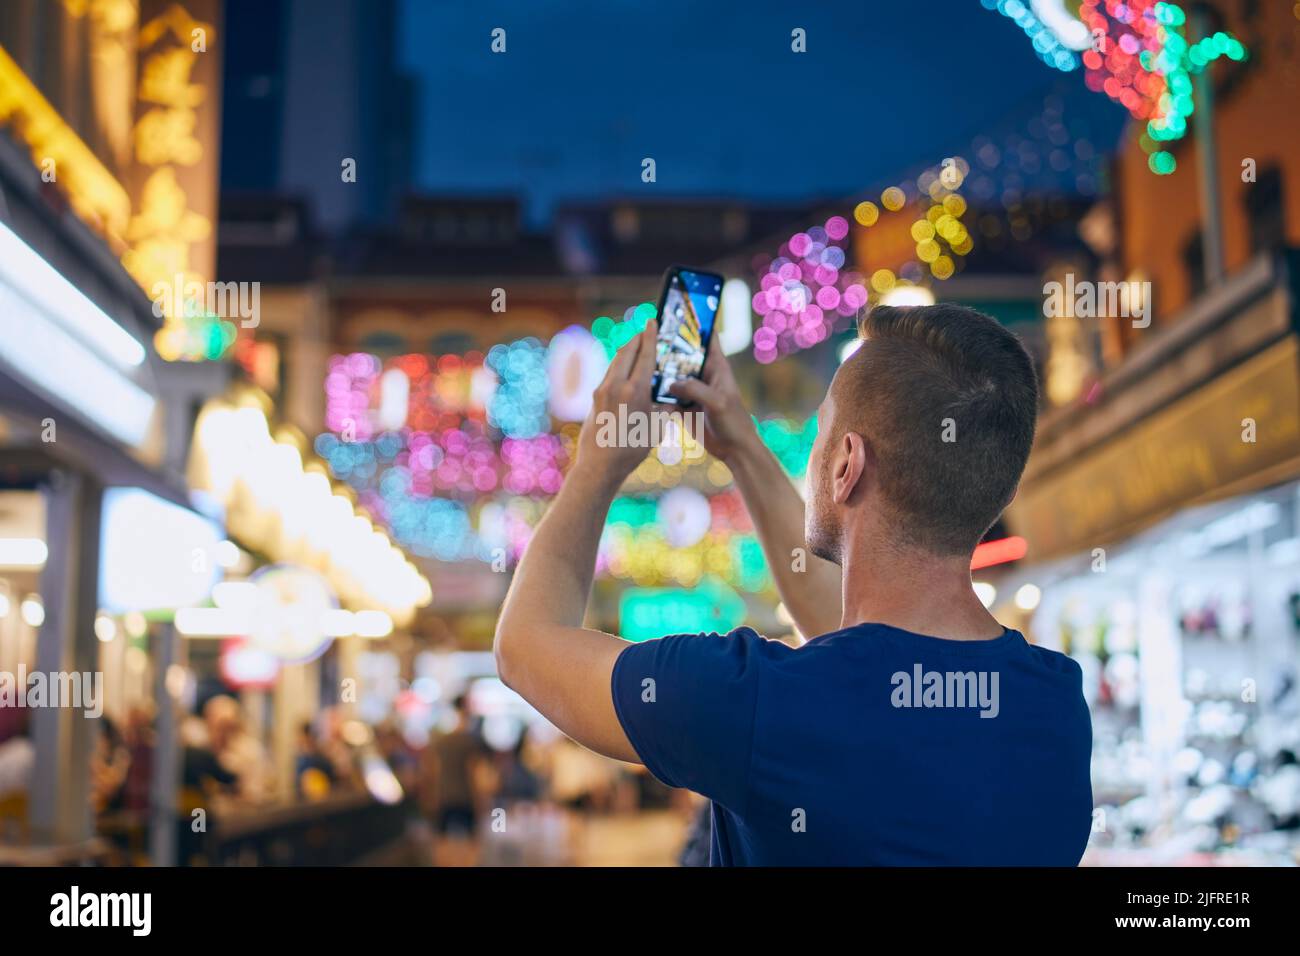 Rear view of man while taking pictures with mobile phone on colorful street. Tourist in Chinetown in Singapore. Stock Photo